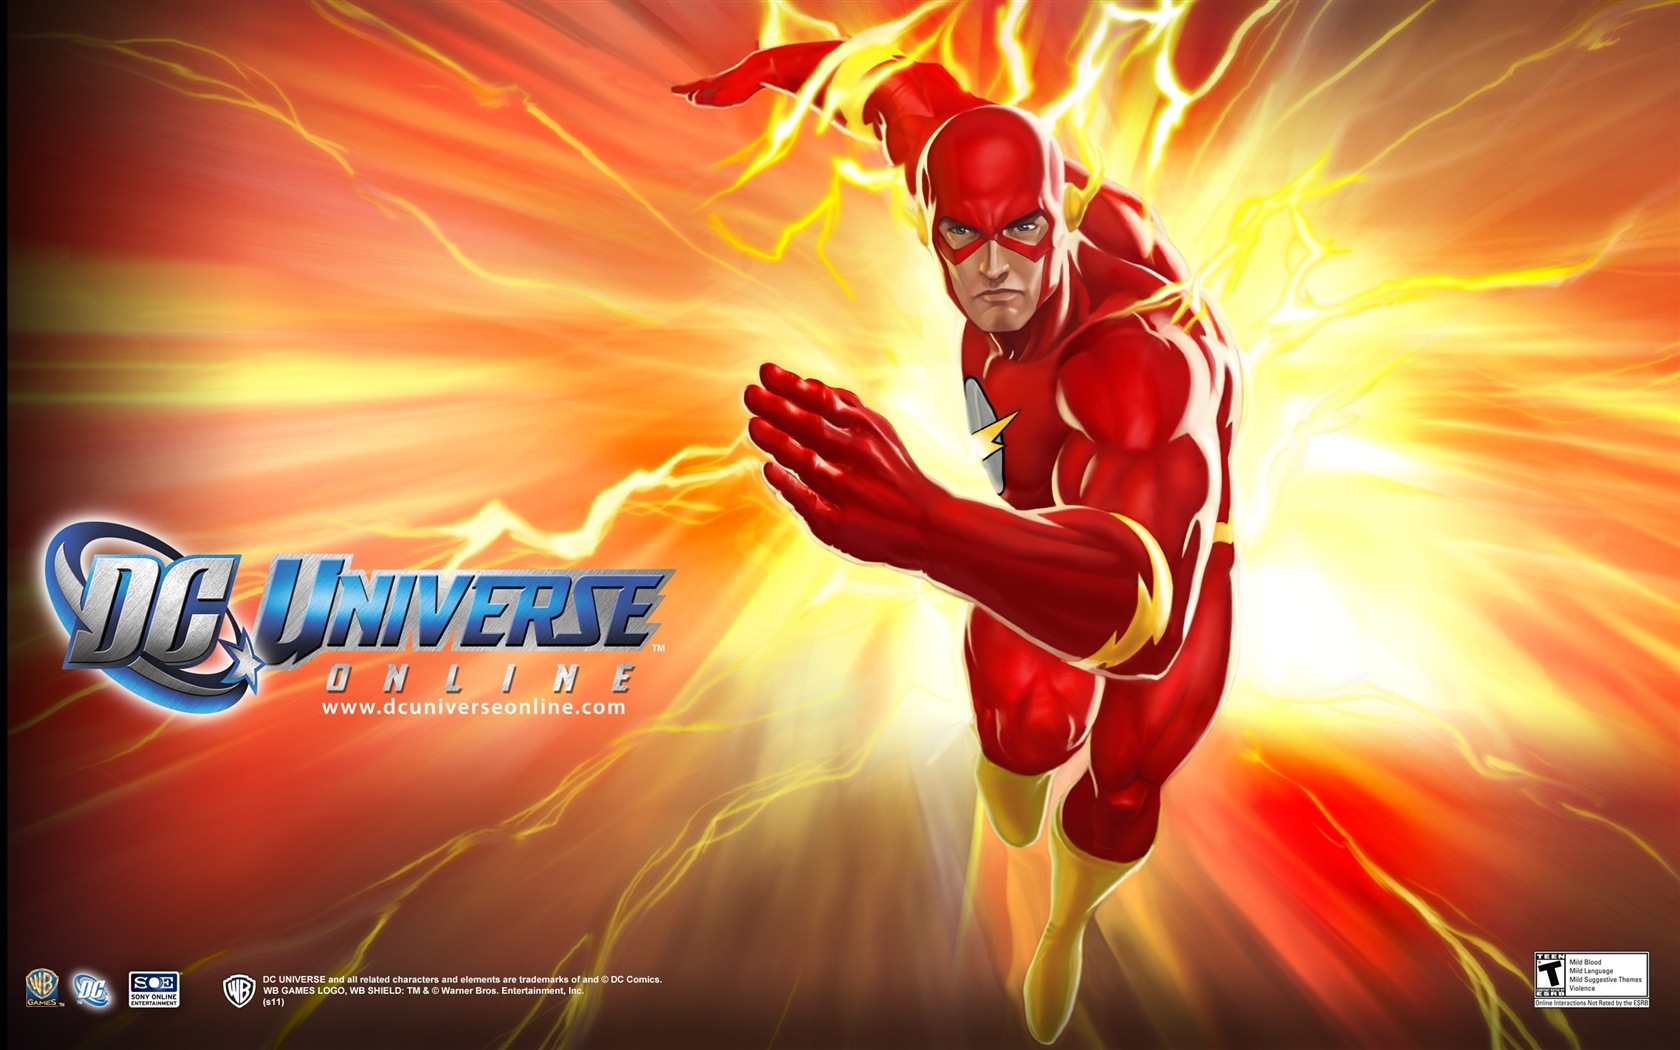 DC Universe Online HD game wallpapers #16 - 1680x1050